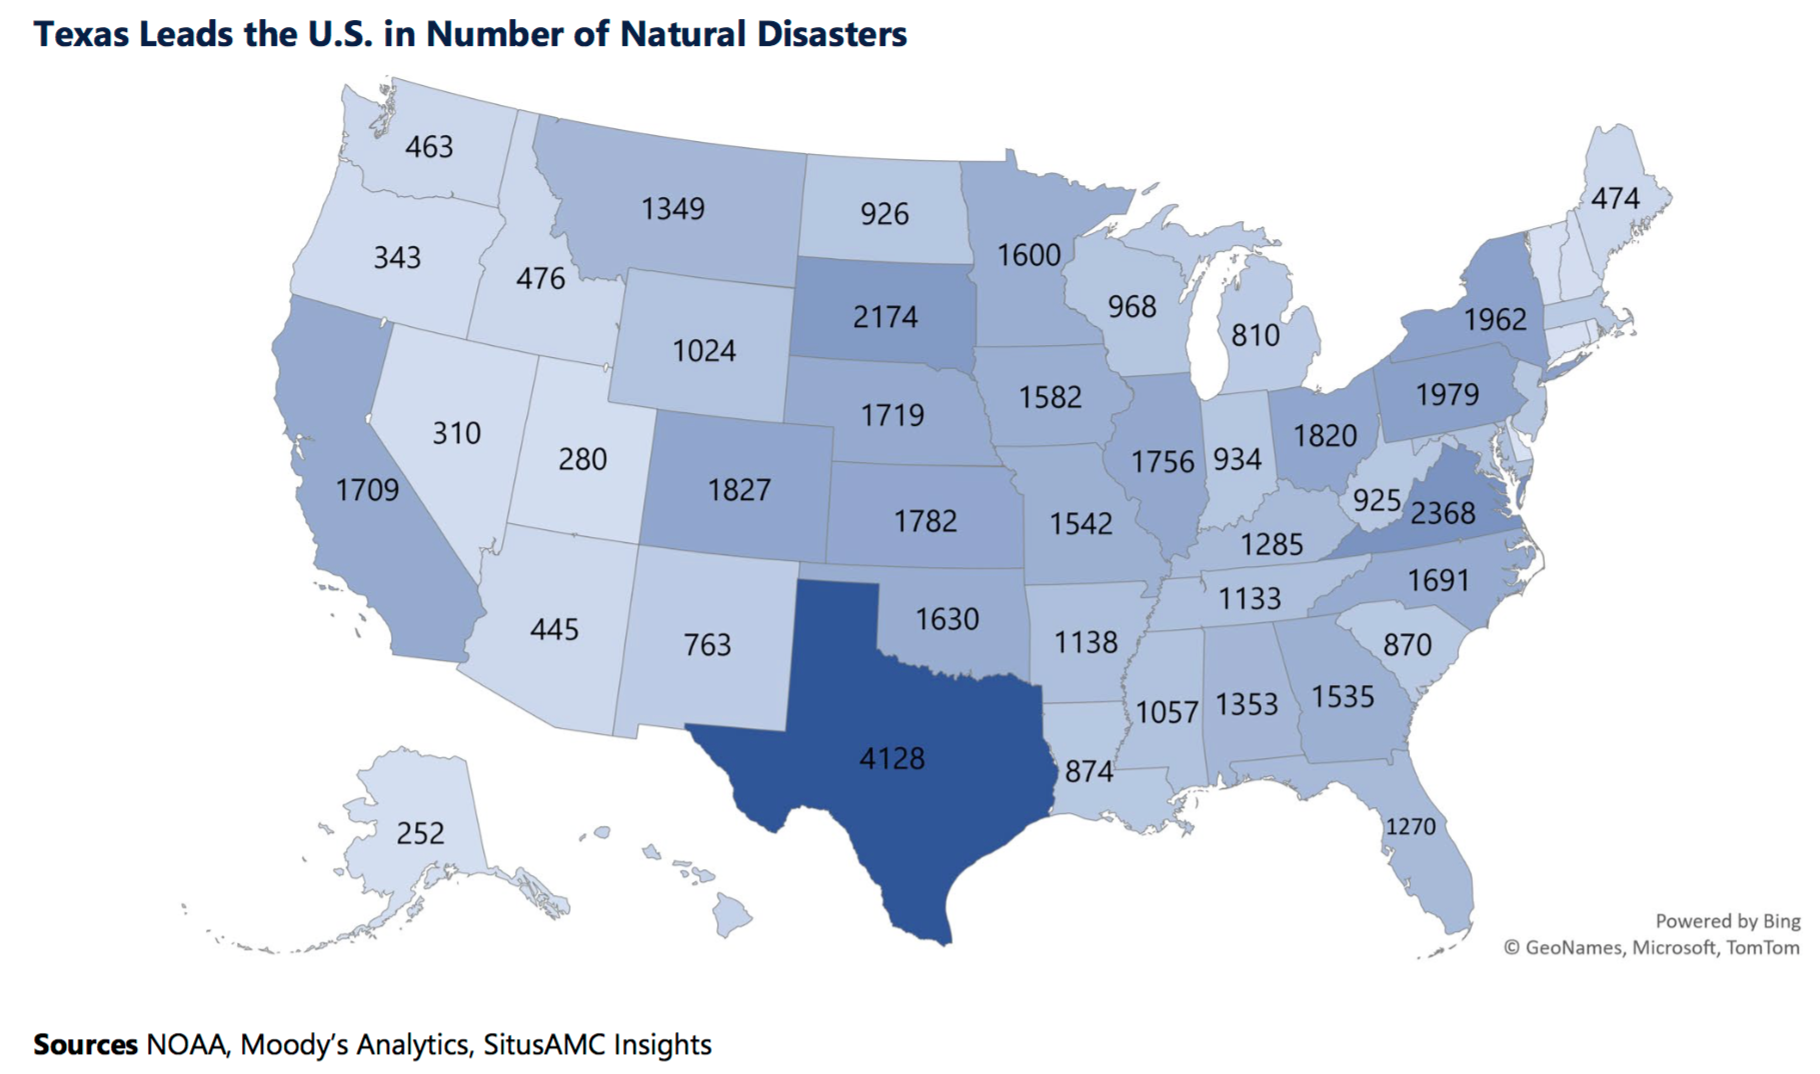 A map of the U.S. on a gradient color scale showing the rate of national disasters in the U.S., with Texas at the highest.